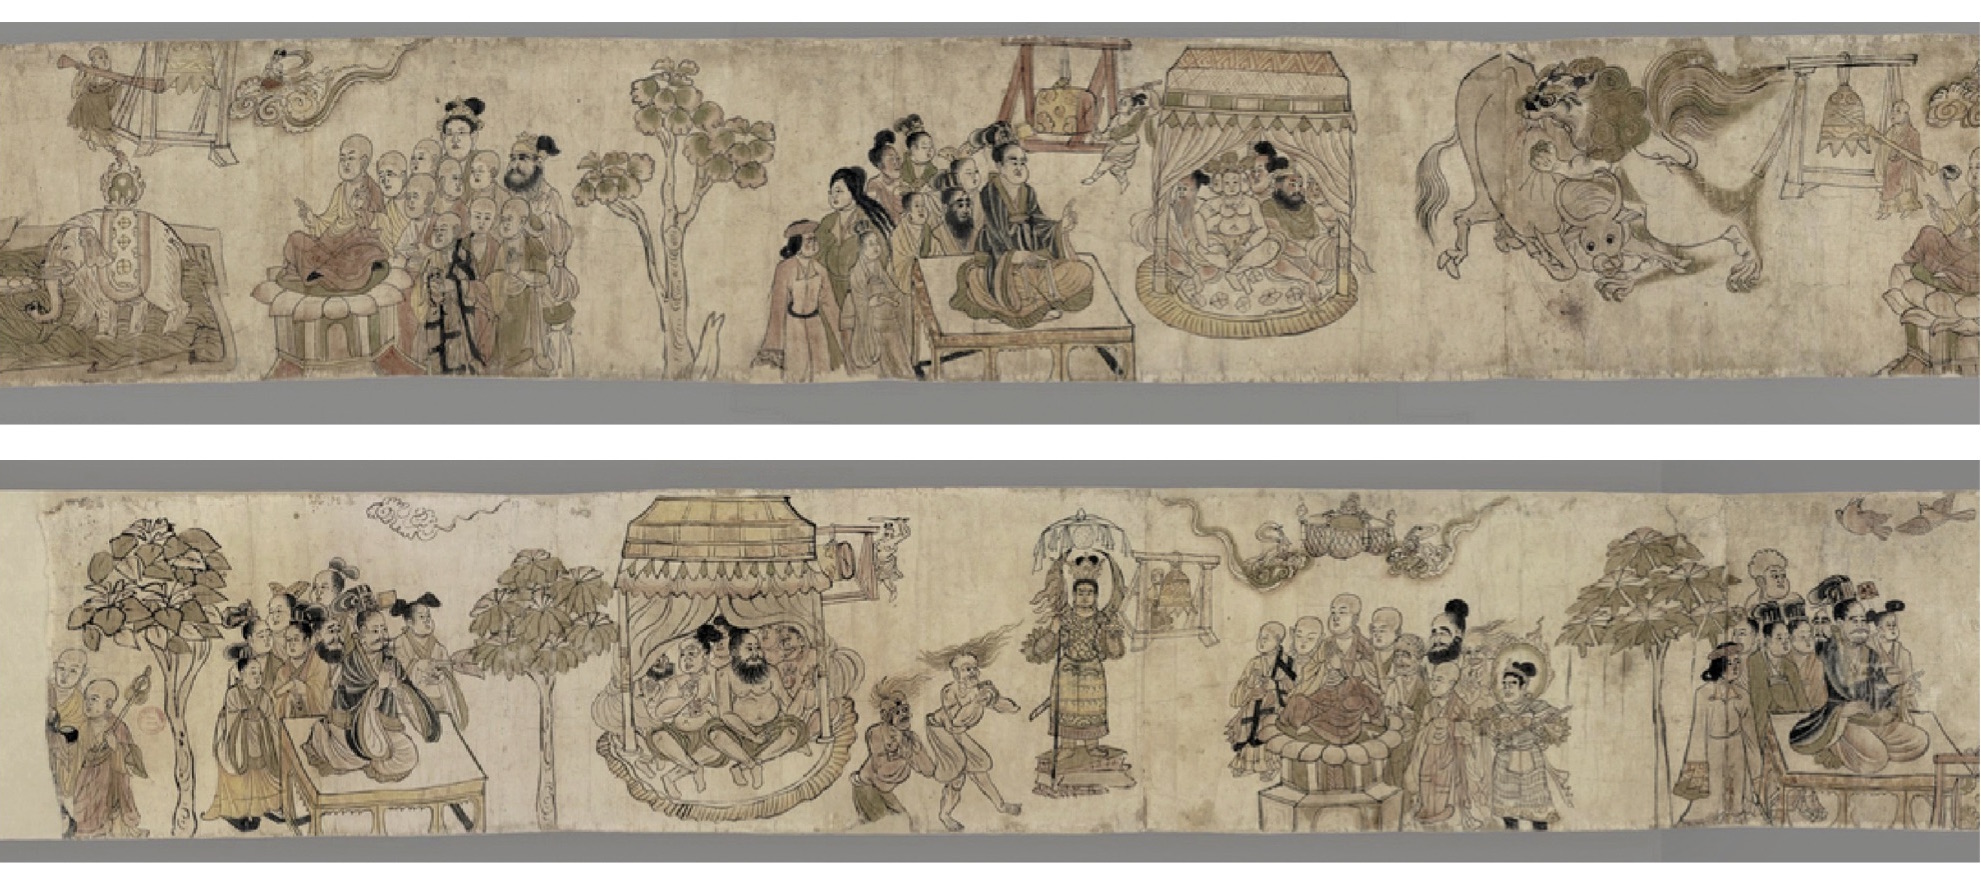 Figure 7: Scroll of the 8th century, "Conquering the Demons", in the collection of the National Library of France